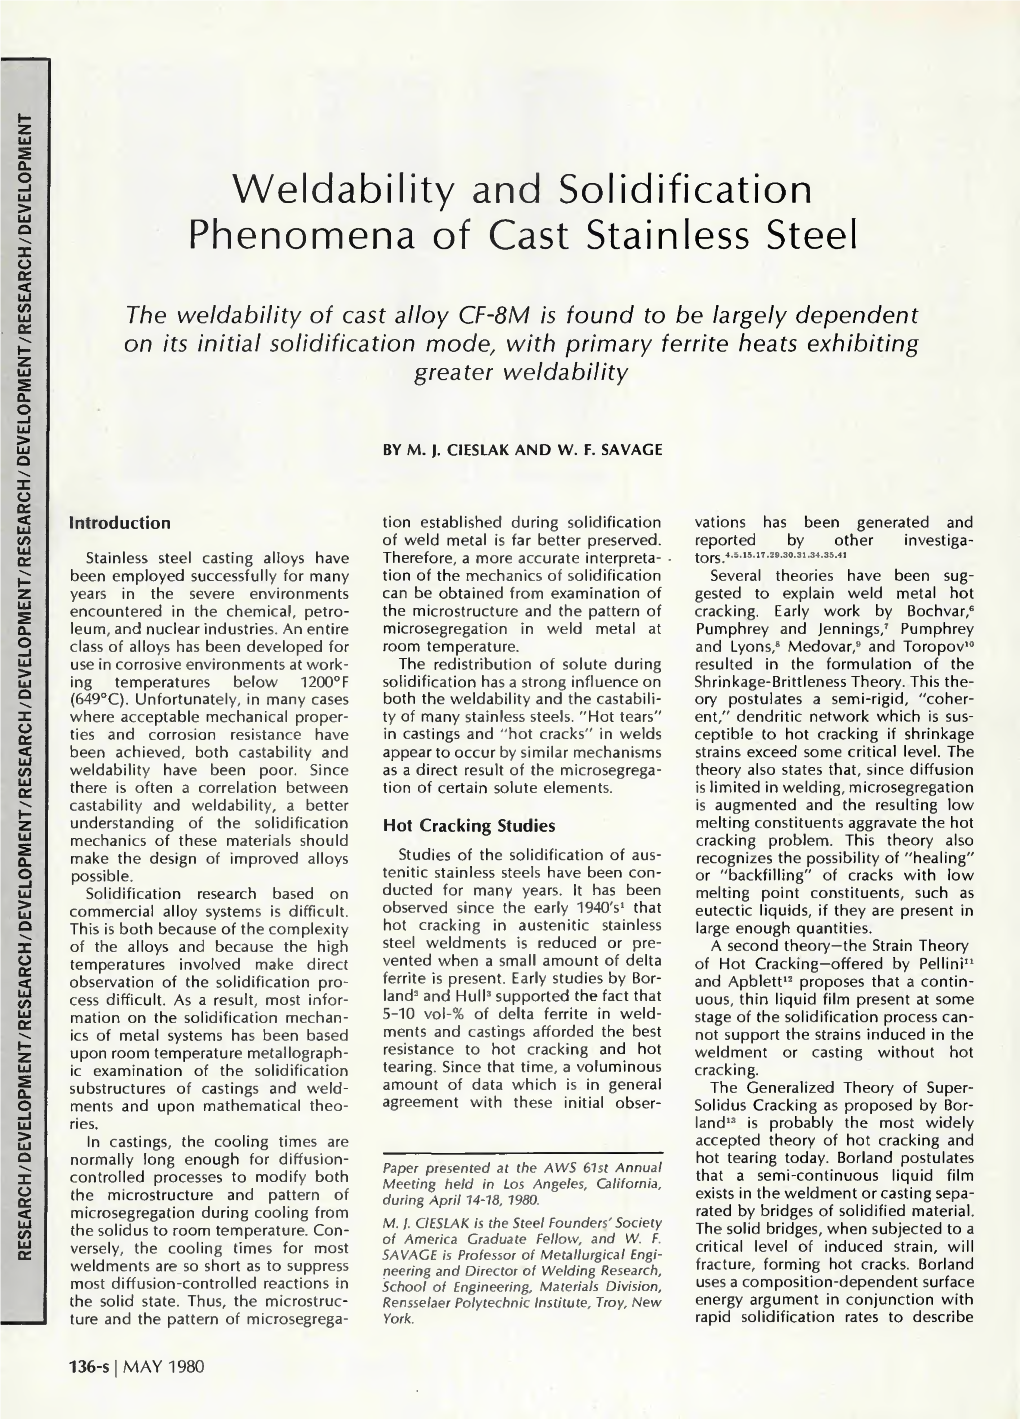 Weldability and Solidification Phenomena of Cast Stainless Steel